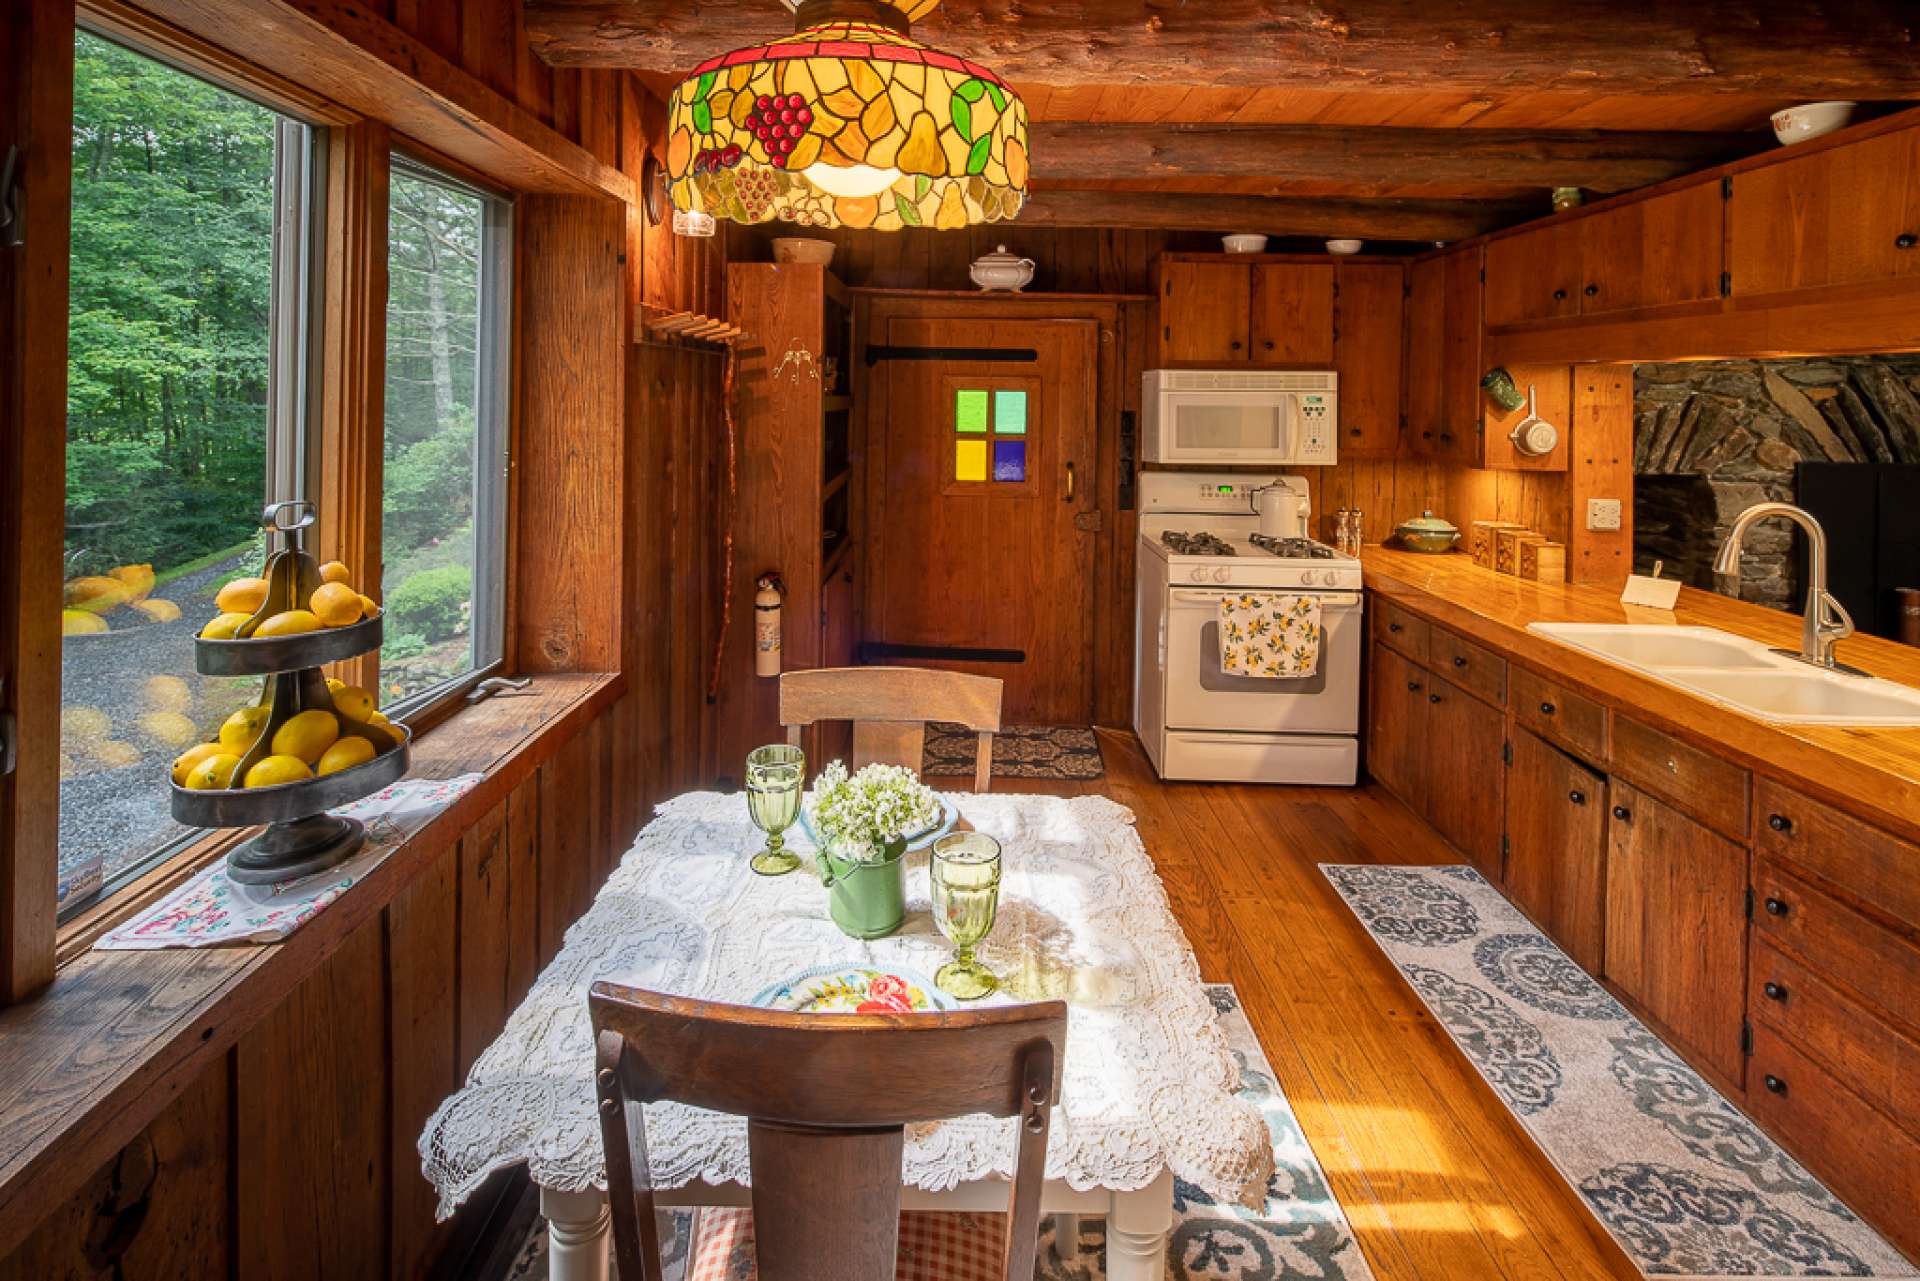 Enter the home through the front door with early 1800s stained glass into the kitchen with wormy chestnut cabinets and red oak hand pegged floors